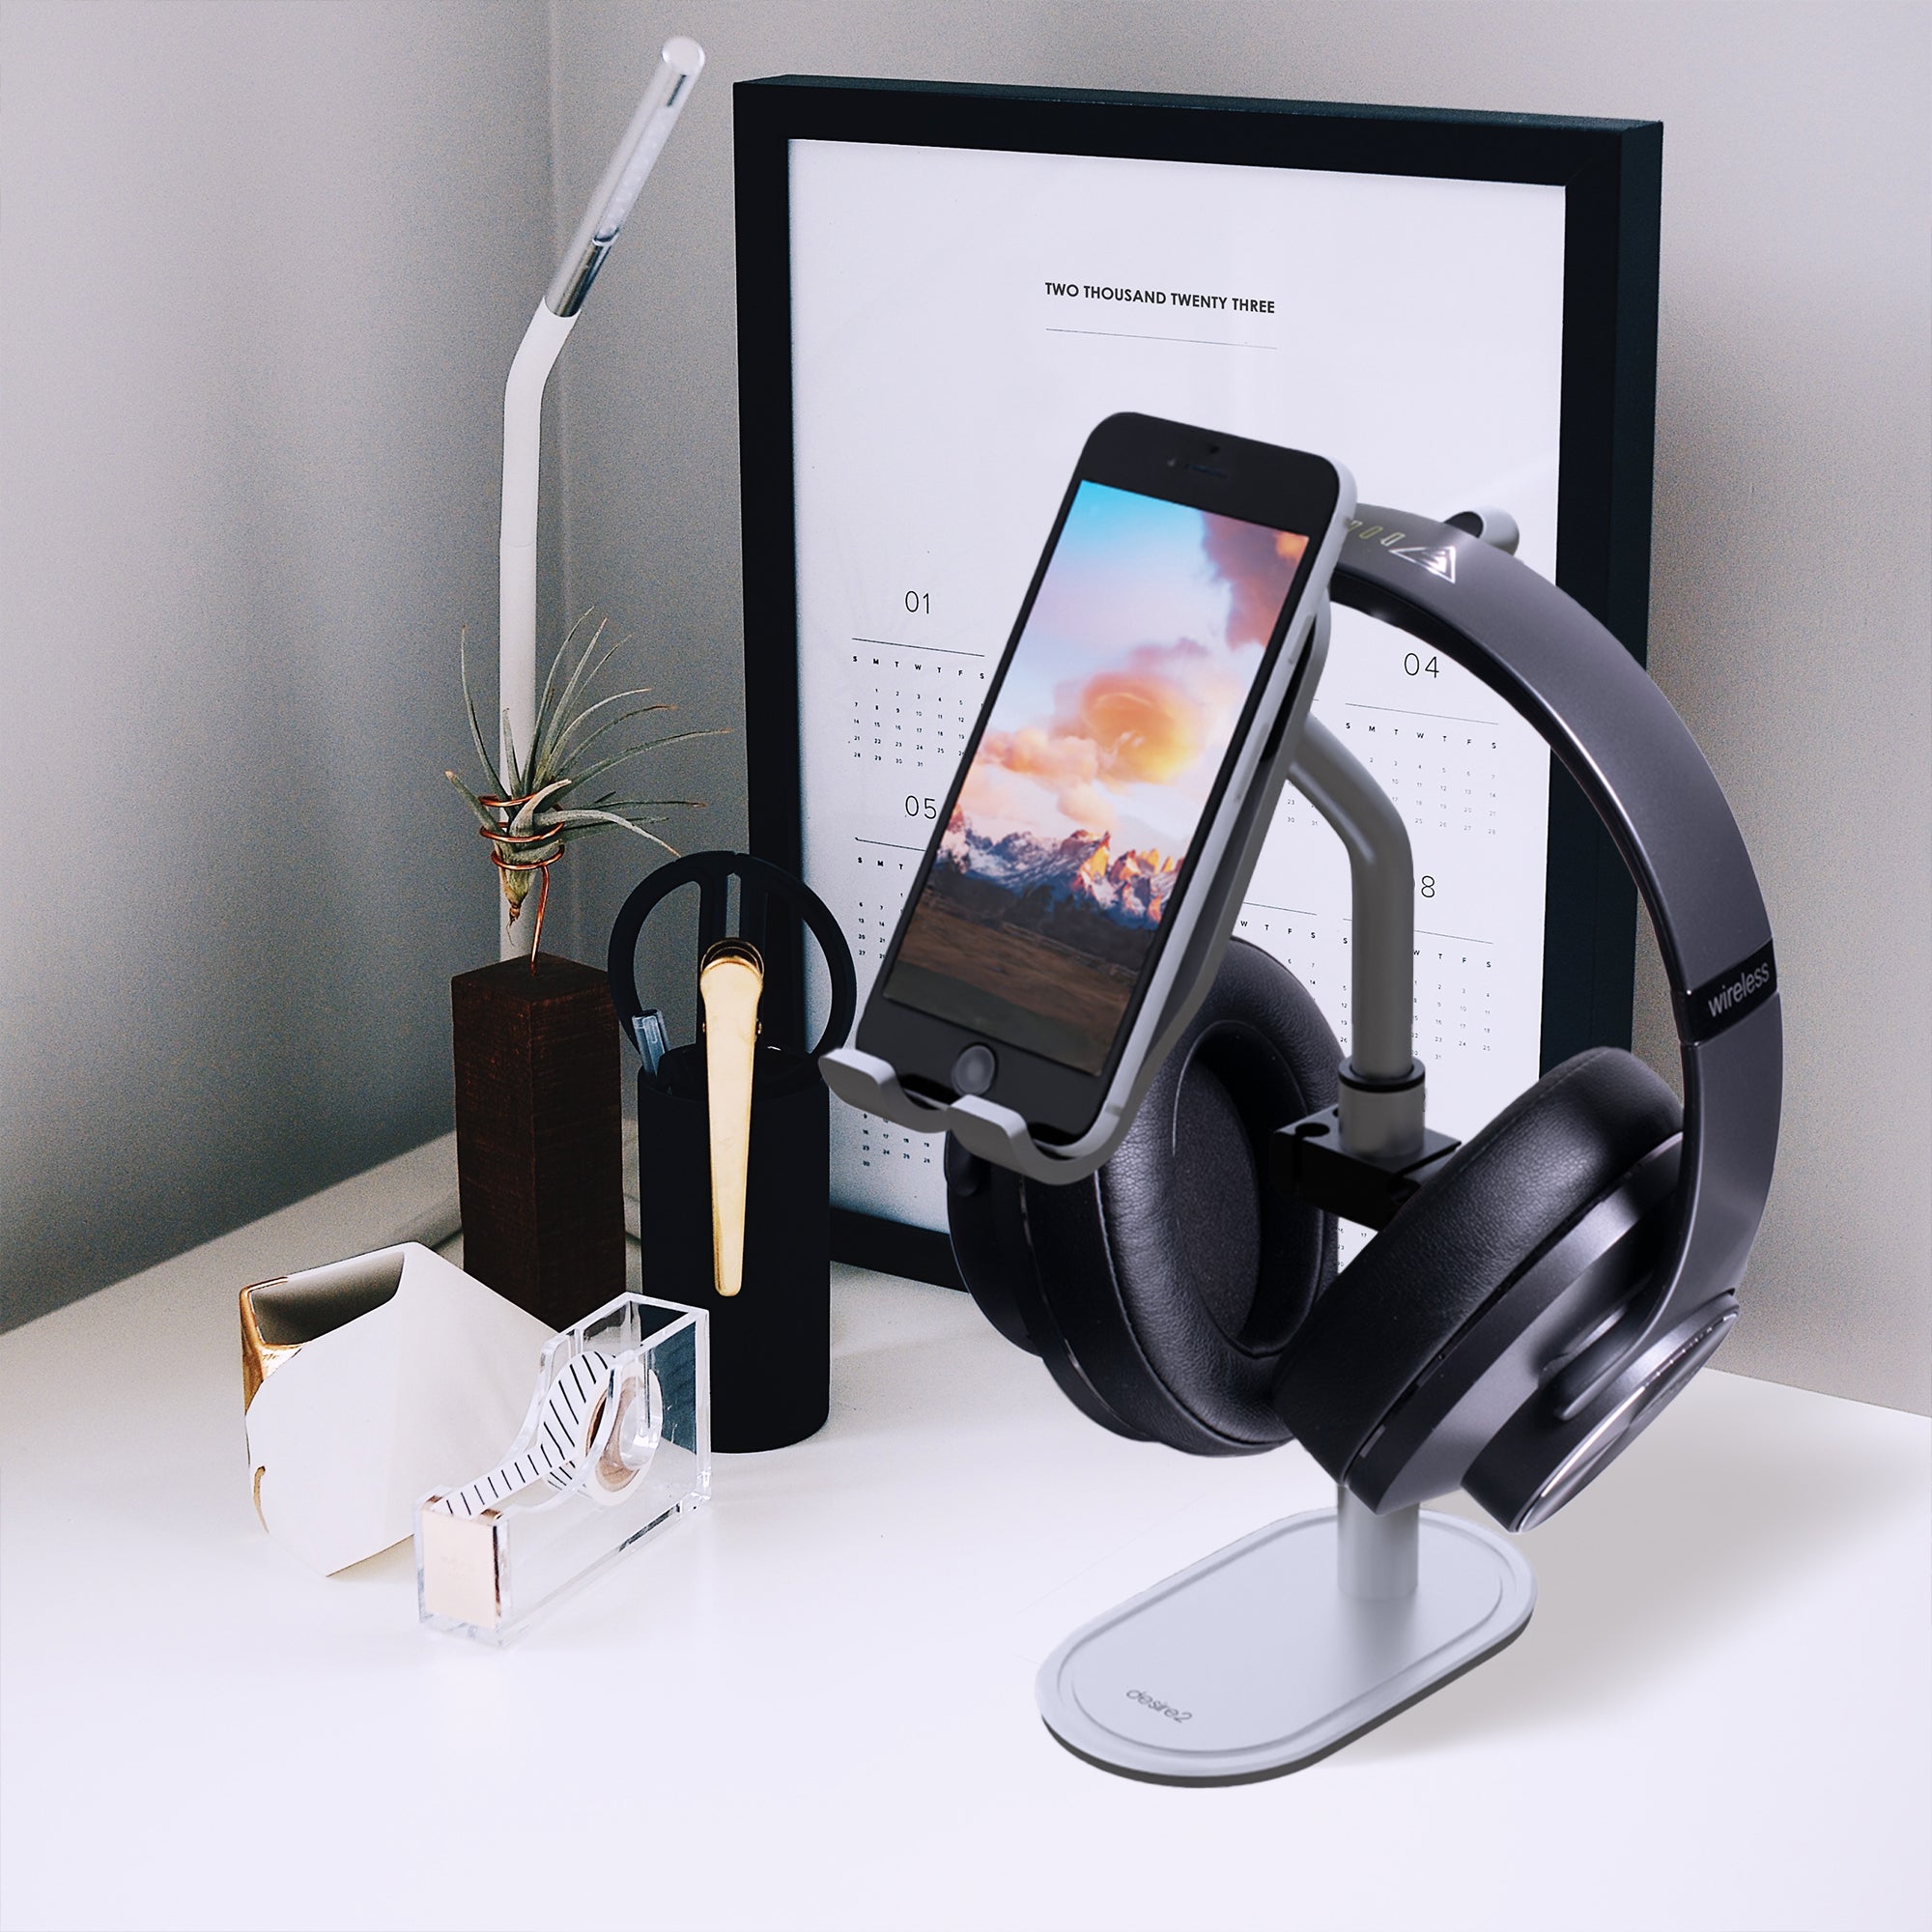 Headrest Pro Headphone And Phone Stand